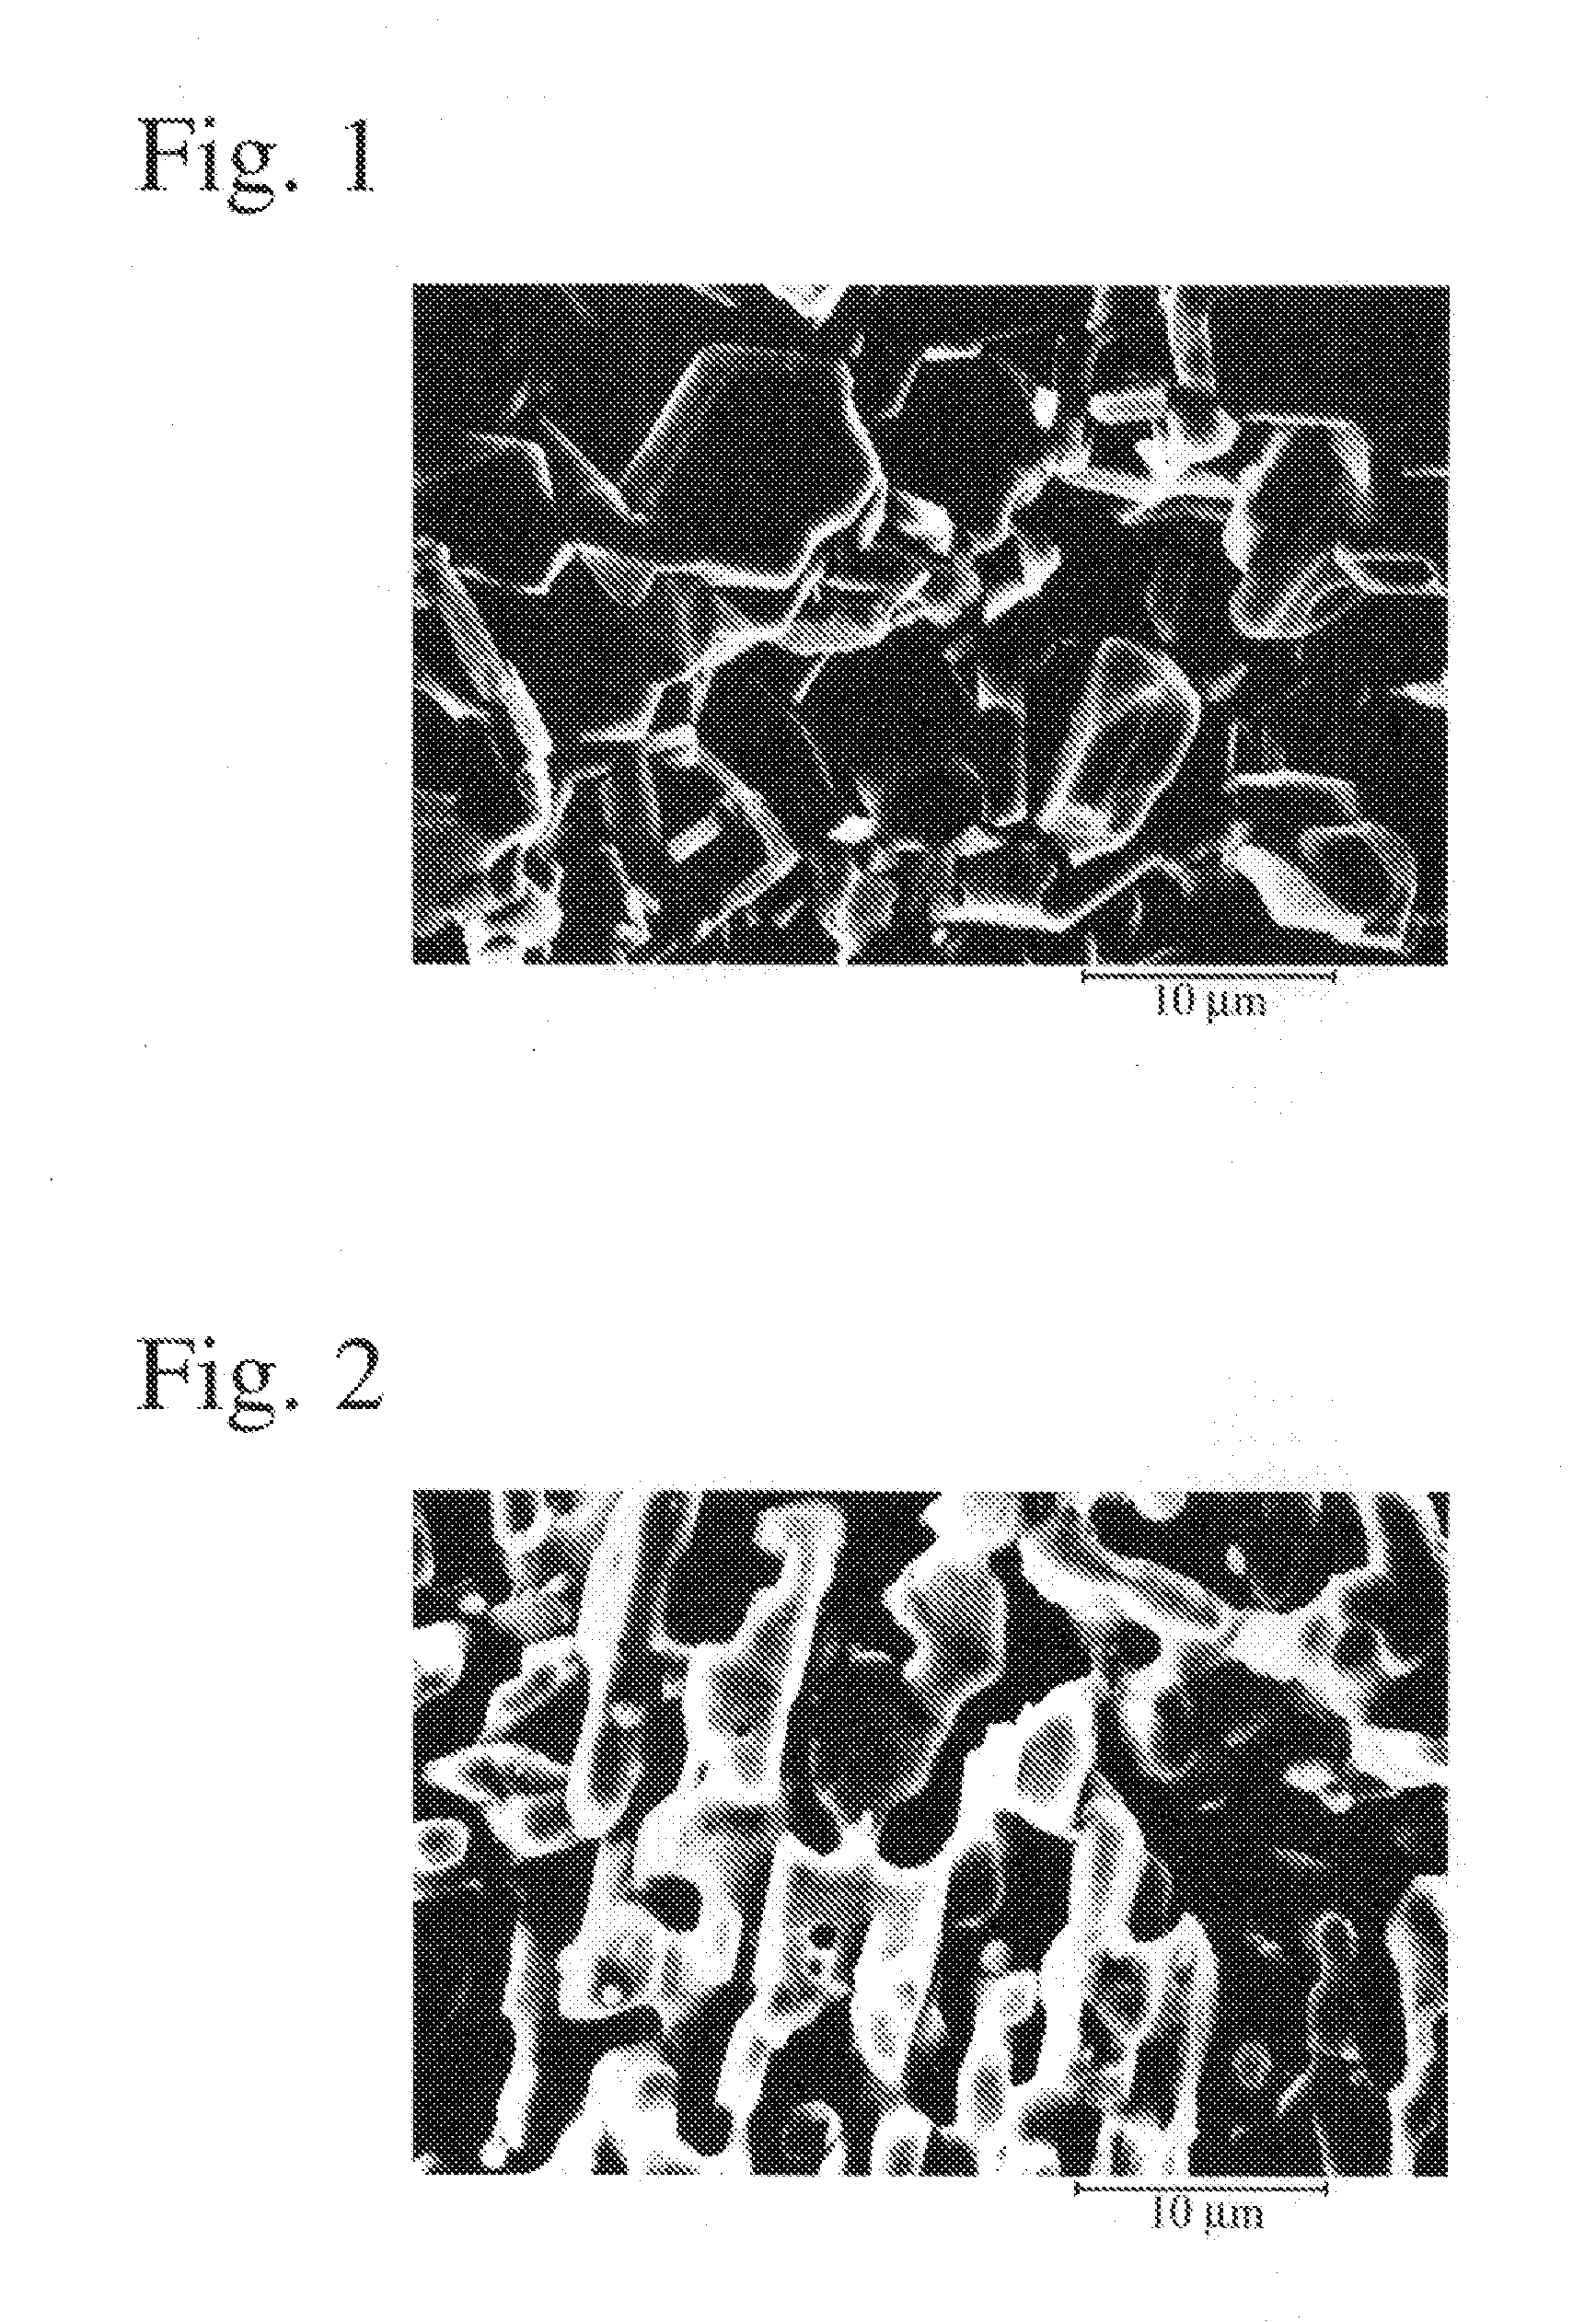 Rotating machine, bonded magnet, magnet roll, and method for producing sintered ferrite magnet